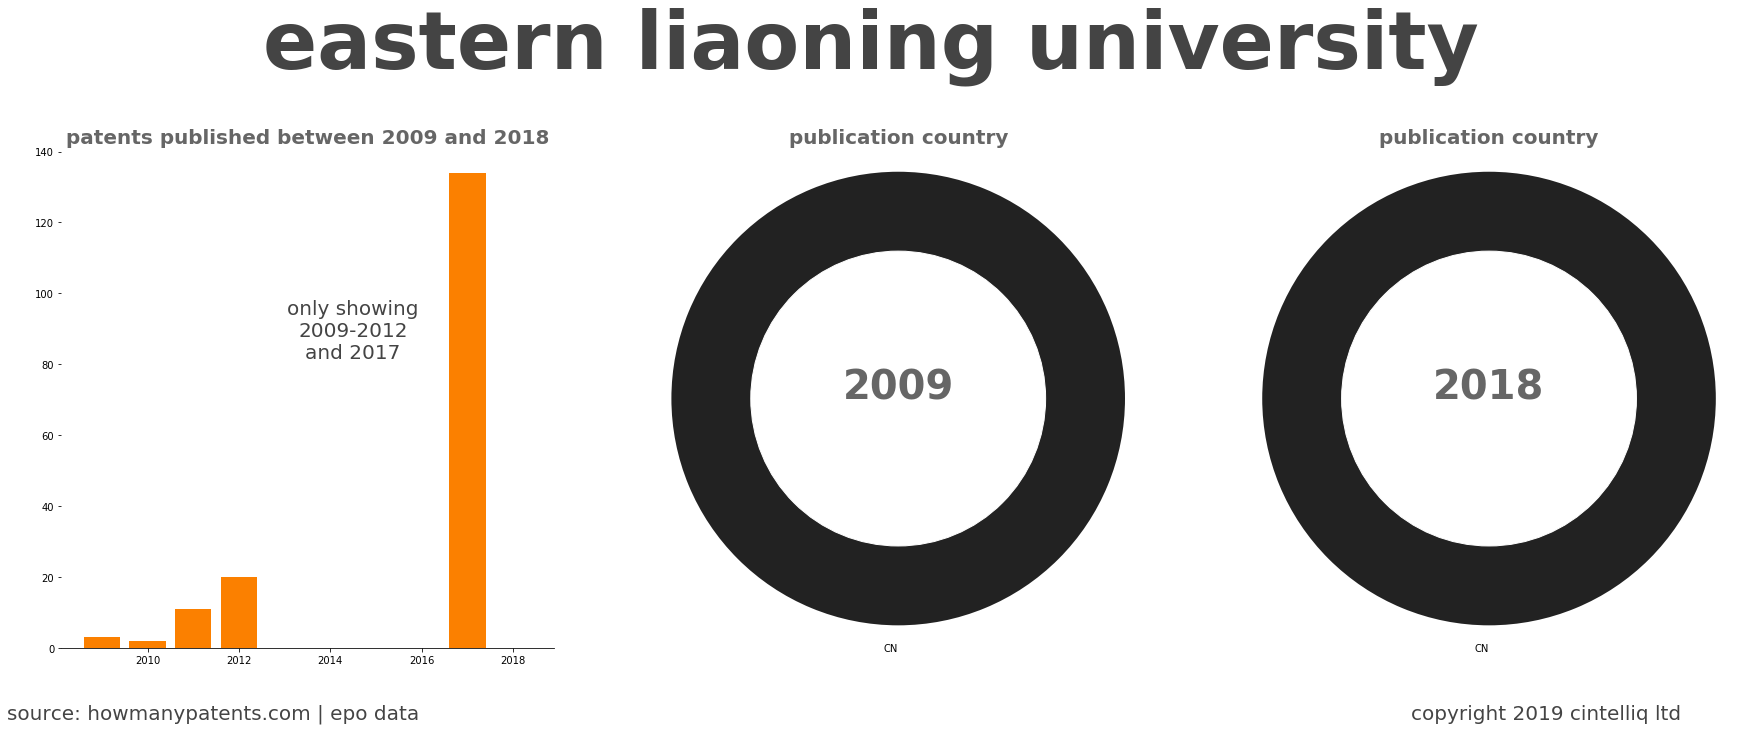 summary of patents for Eastern Liaoning University